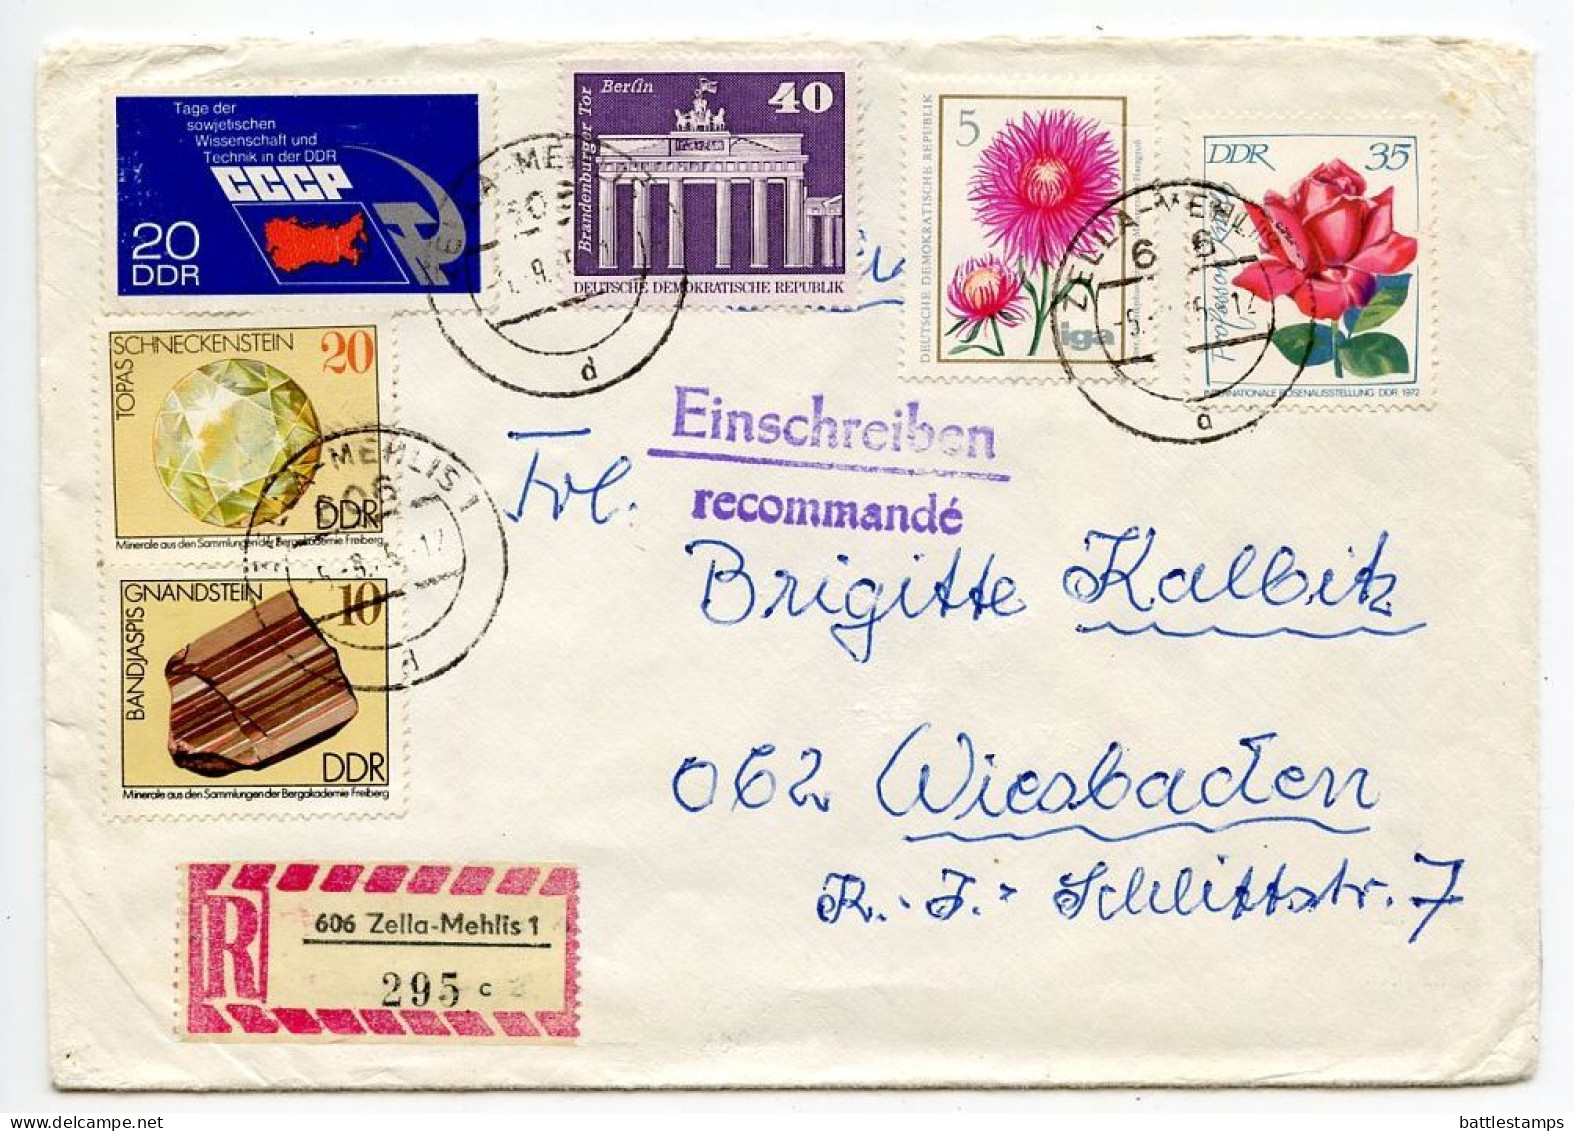 Germany East 1975 Registered Cover; Zella-Mehlis To Wiesbaden; Mix Of Stamps - Covers & Documents